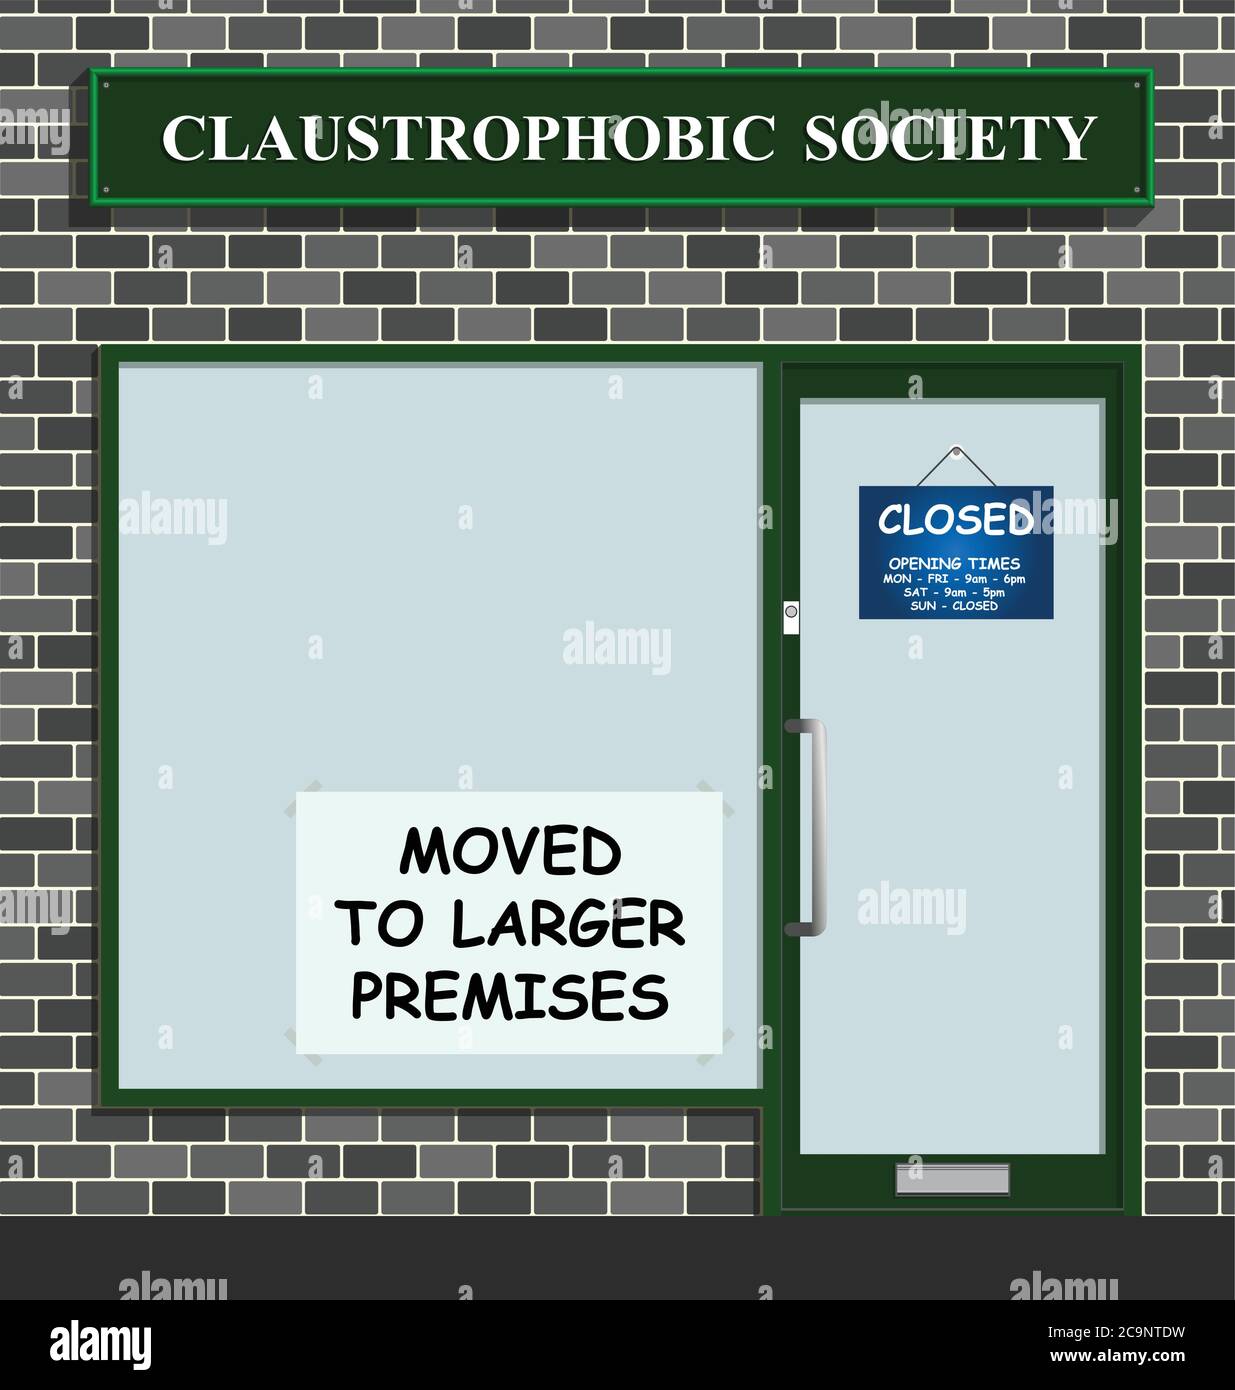 The Claustrophobic Society moves to larger premises Stock Vector